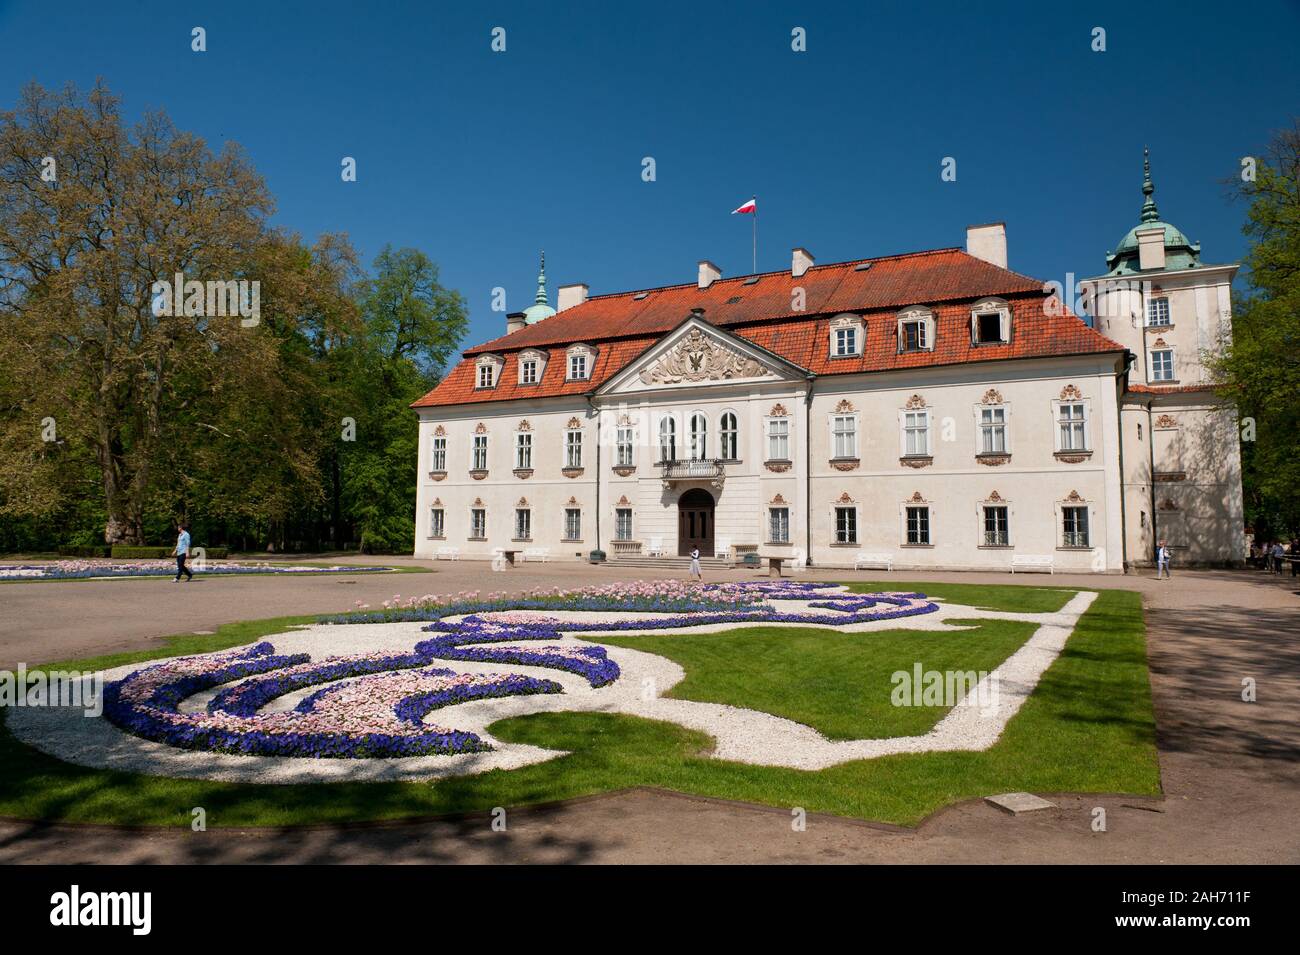 Radziwiłł's Palace in Nieborów exterior in Poland, Europe, building outside view across the ornamental baroque garden, visiting tourist travel place. Stock Photo